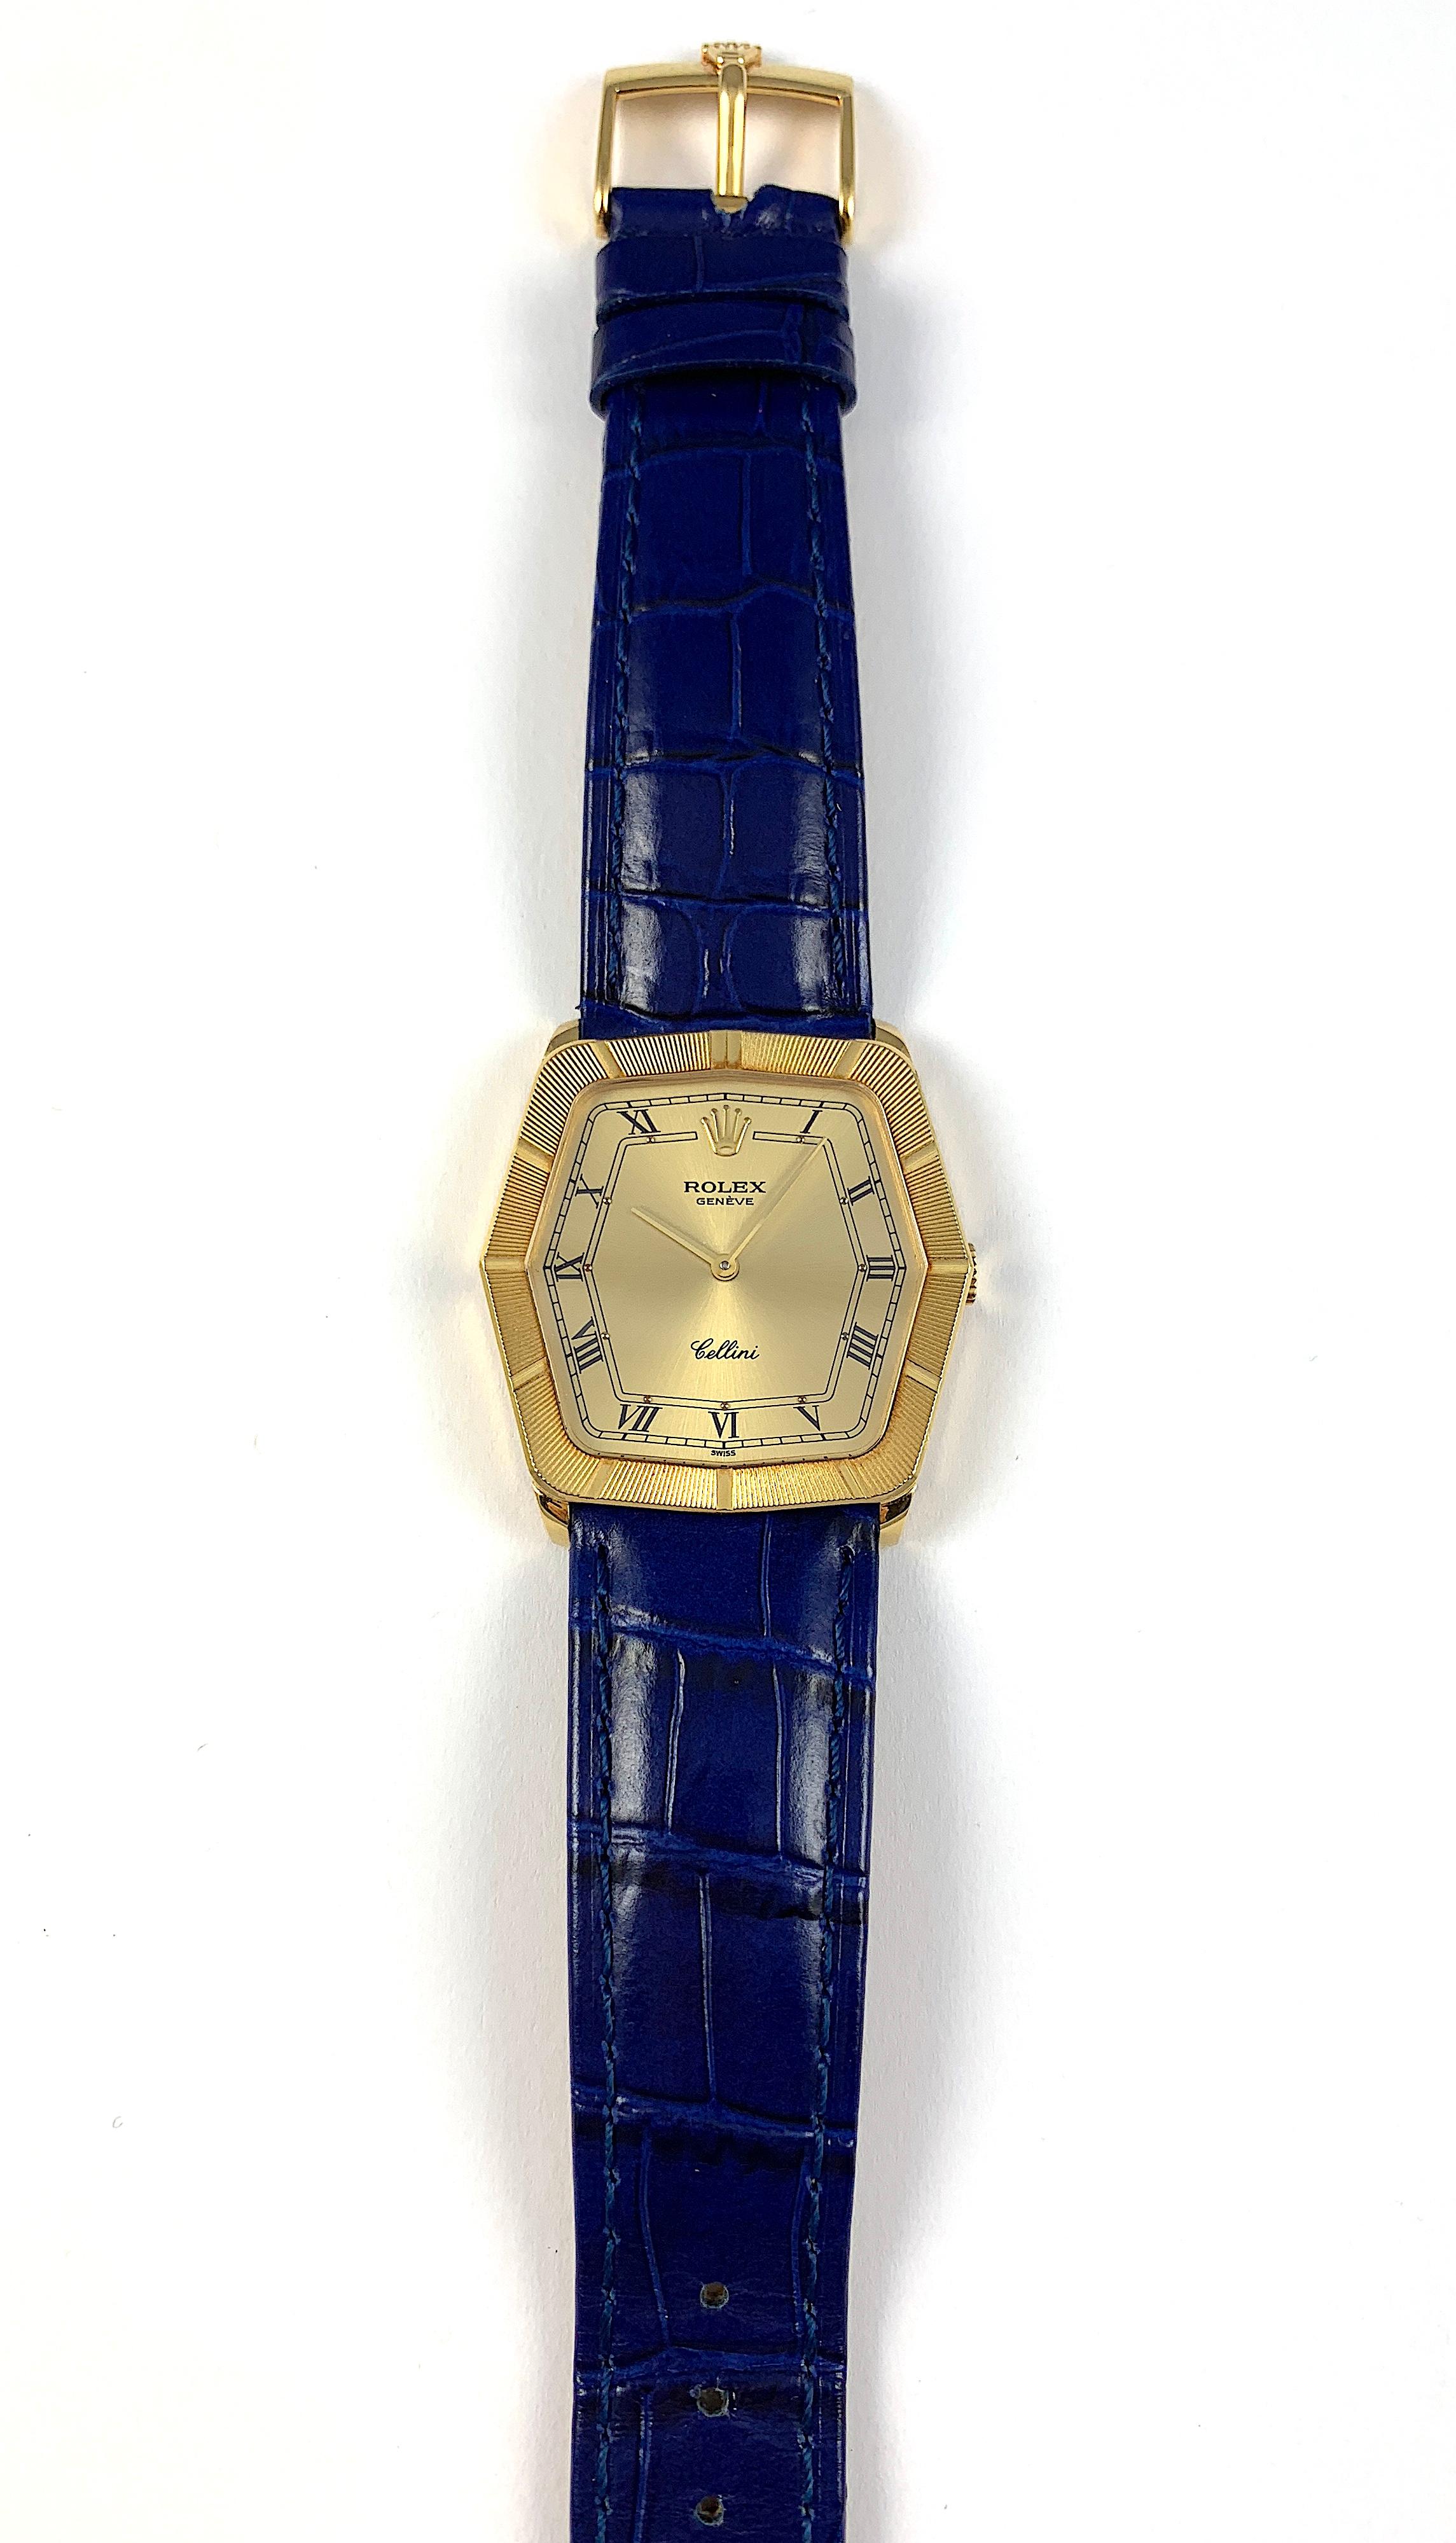 Rolex Cellini 18K Yellow Gold Manual Wind Wristwatch
Factory Champagne Decorated Dial with Applied Rolex Crown and Roman Numerals and Gold Dots Above the Roman Numeral Markers
Decorated Etched Bezel in 18K Yellow Gold
Solid 18K Yellow Gold Case